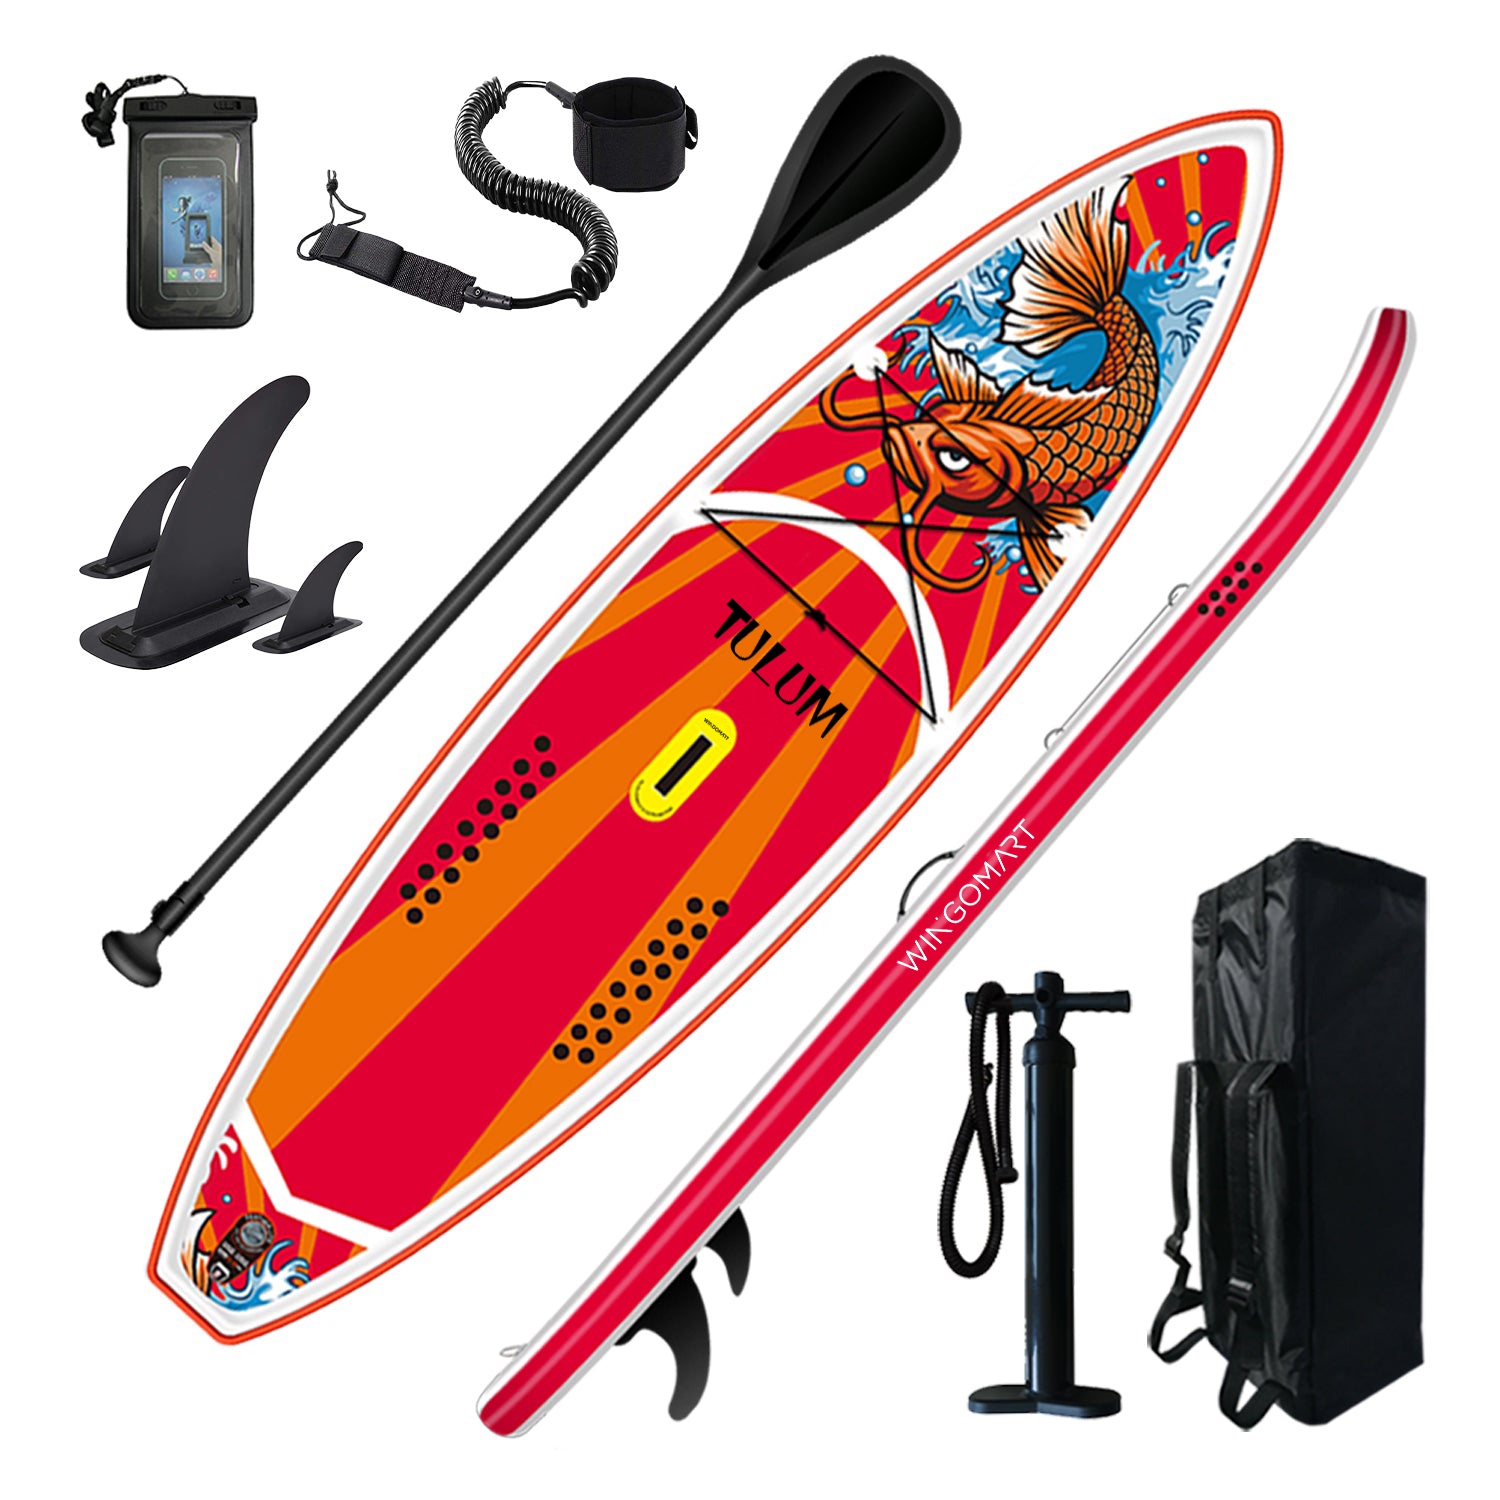 WINGOMART XL 12FT Inflatable Stand up Paddle Board w/Premium SUP  Accessories & Carry Bag, upgraded paddle boards w/ 3 Fish Fin for Paddling, Up to 2 Person / 380LB -Tulum Edition